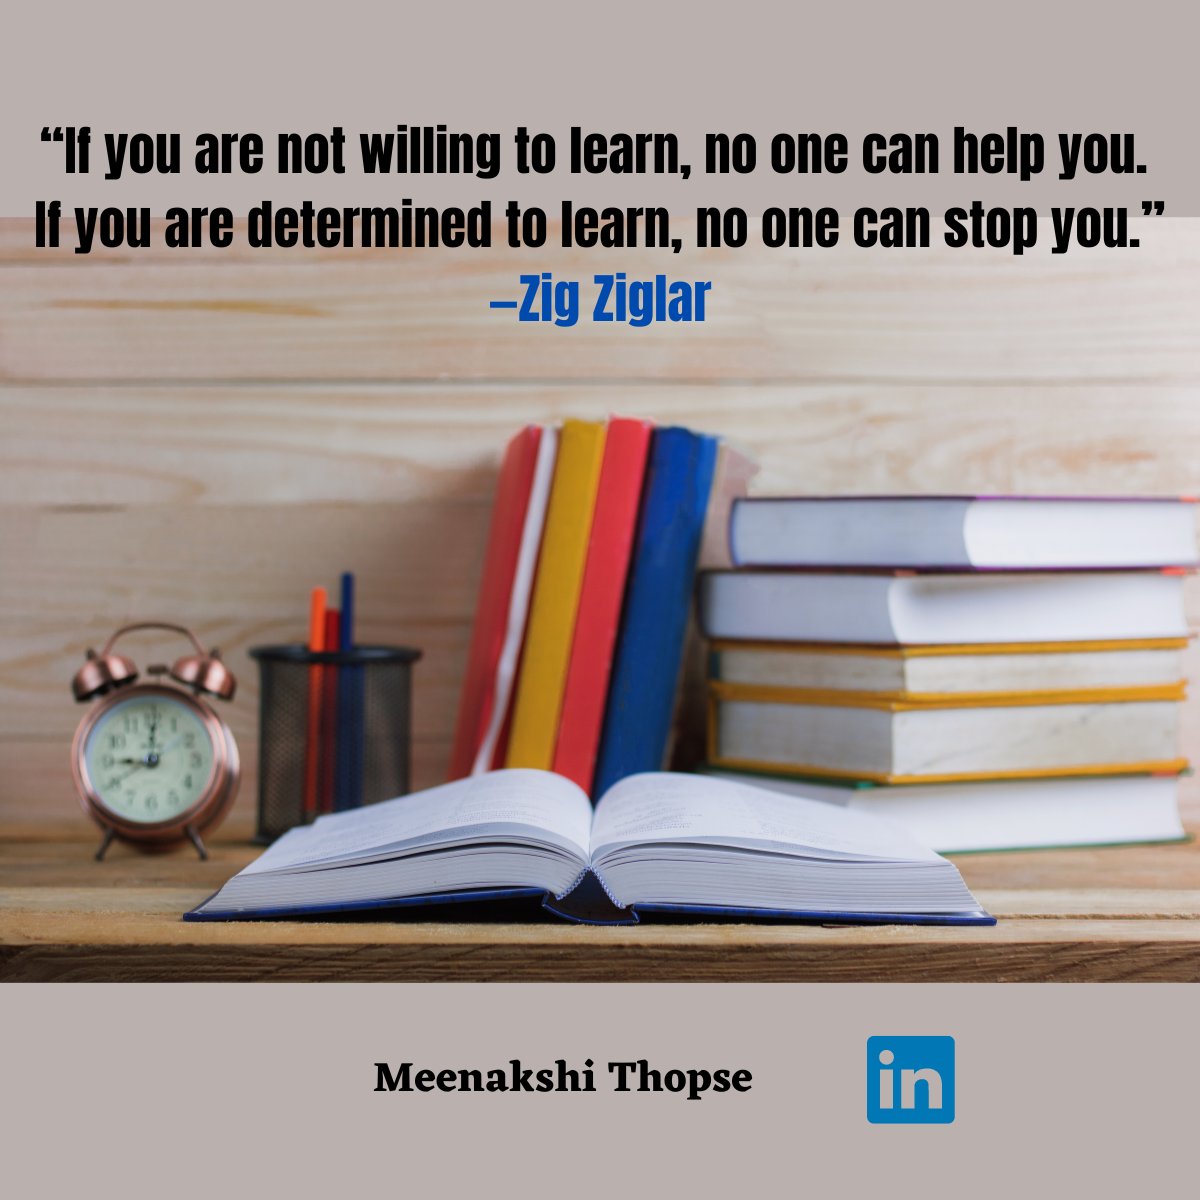 Isn't this true about Learning? 📚 

#learning #determination #knowledge #learninganddevelopment #personalgrowthanddevelopment #knowledgeispower #learnandgrow #learnanythinganywhere #dontstoplearning✔️ #dontstoplearningandgrowing